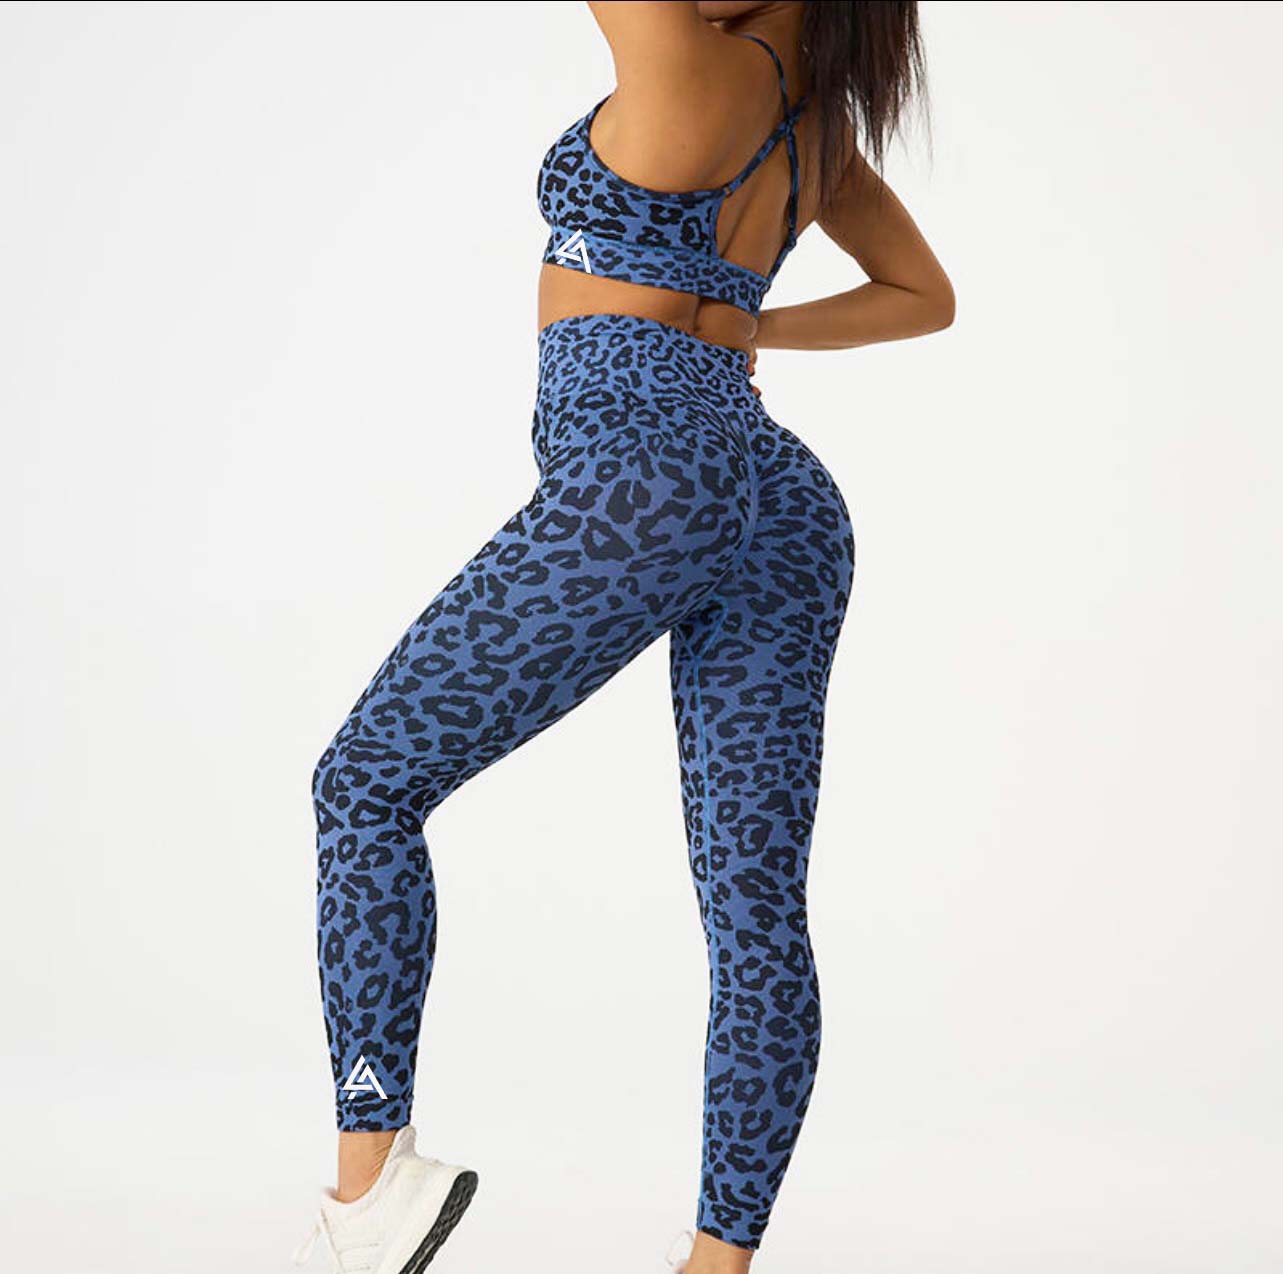 Blue sports leggings with leopard print